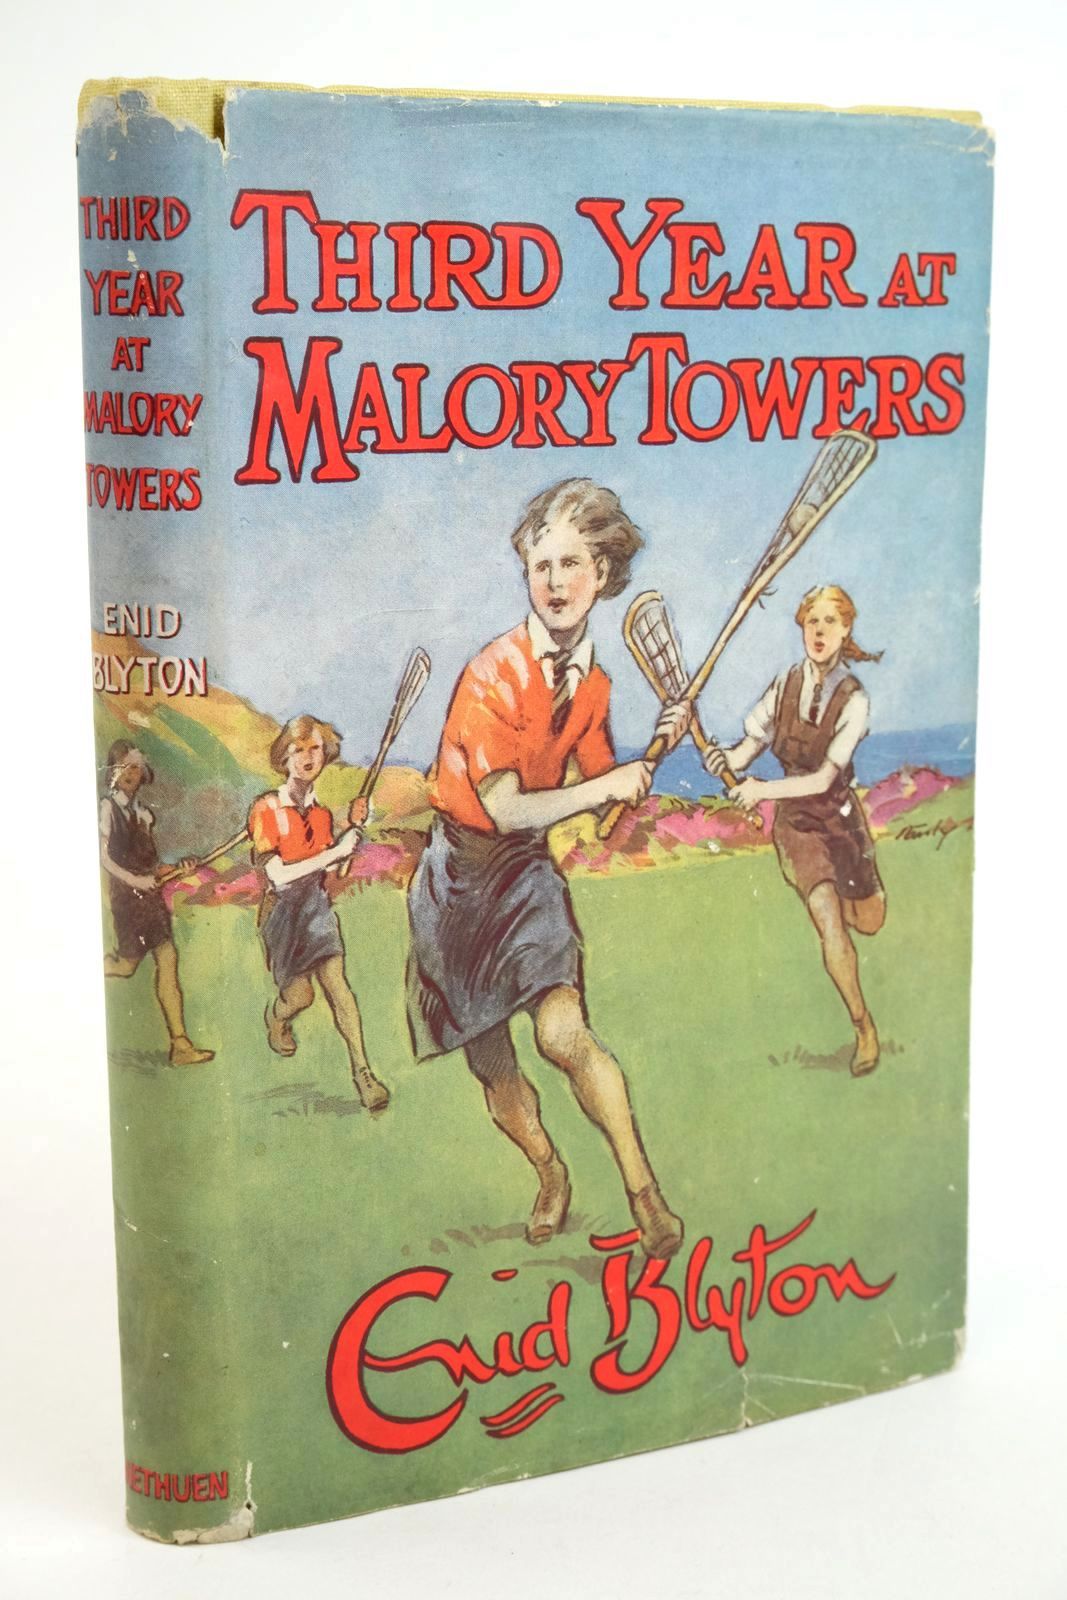 Photo of THIRD YEAR AT MALORY TOWERS written by Blyton, Enid illustrated by Lloyd, Stanley published by Methuen & Co. Ltd. (STOCK CODE: 1322079)  for sale by Stella & Rose's Books